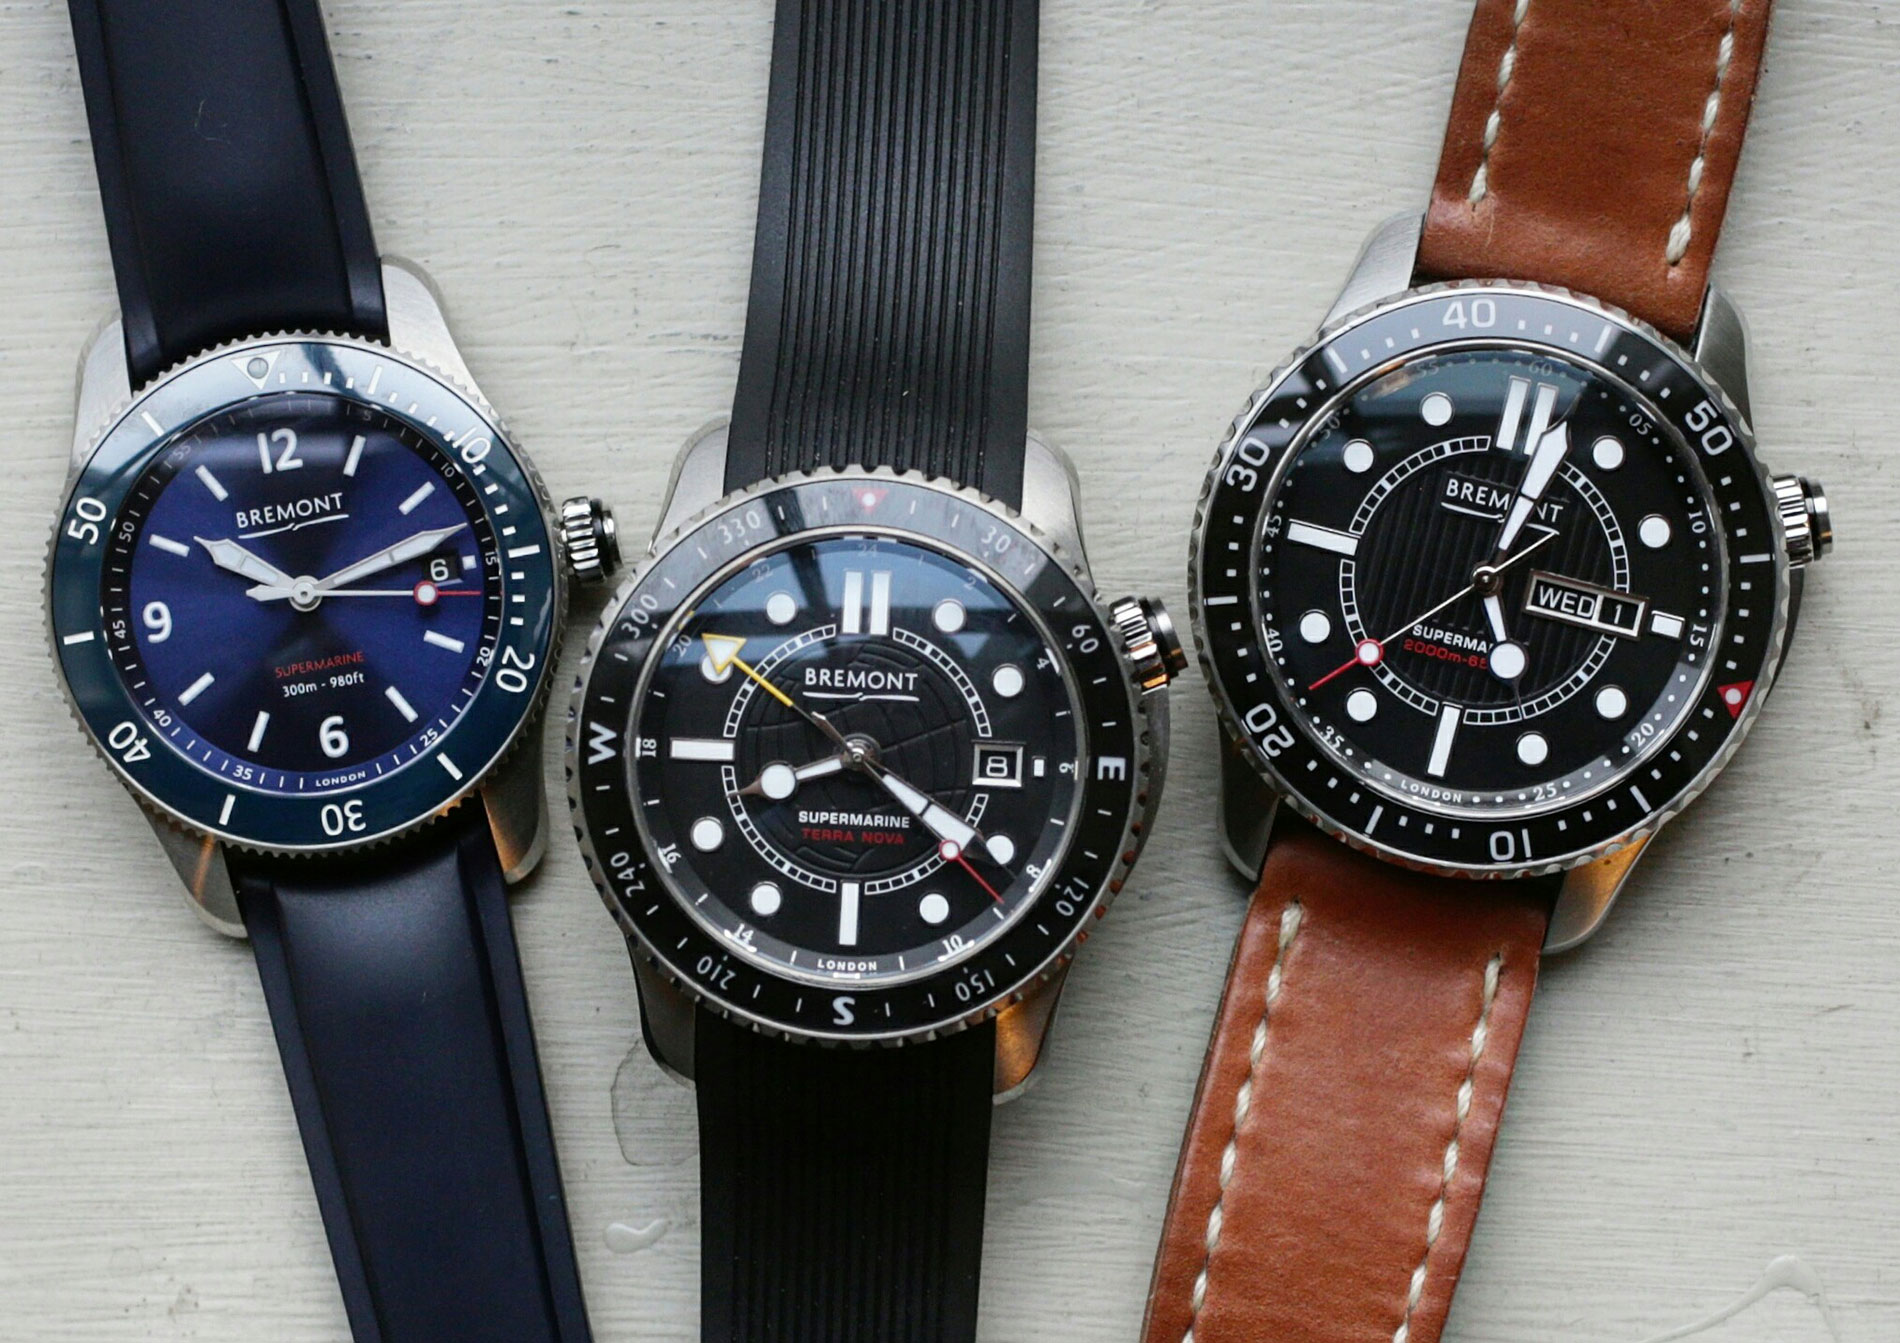 Five things you need to know about the Supermarine range